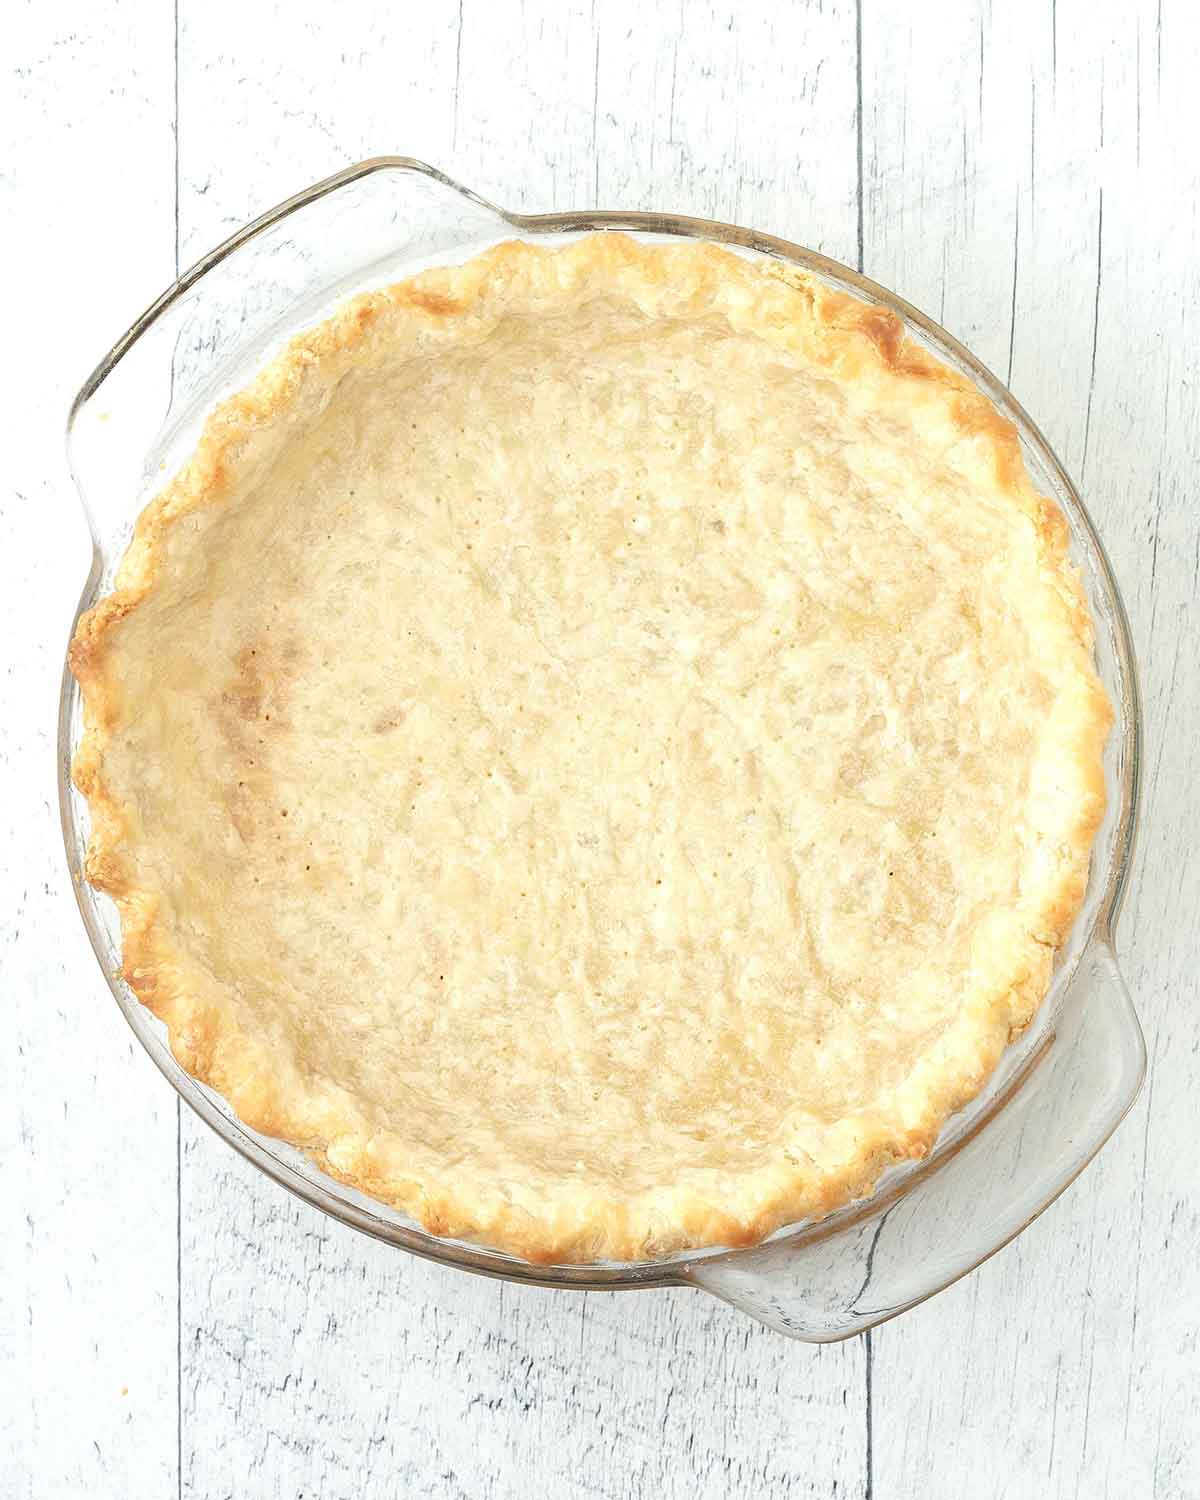 An overhead shot of a fully baked empty pie crust in a glass pie plate.